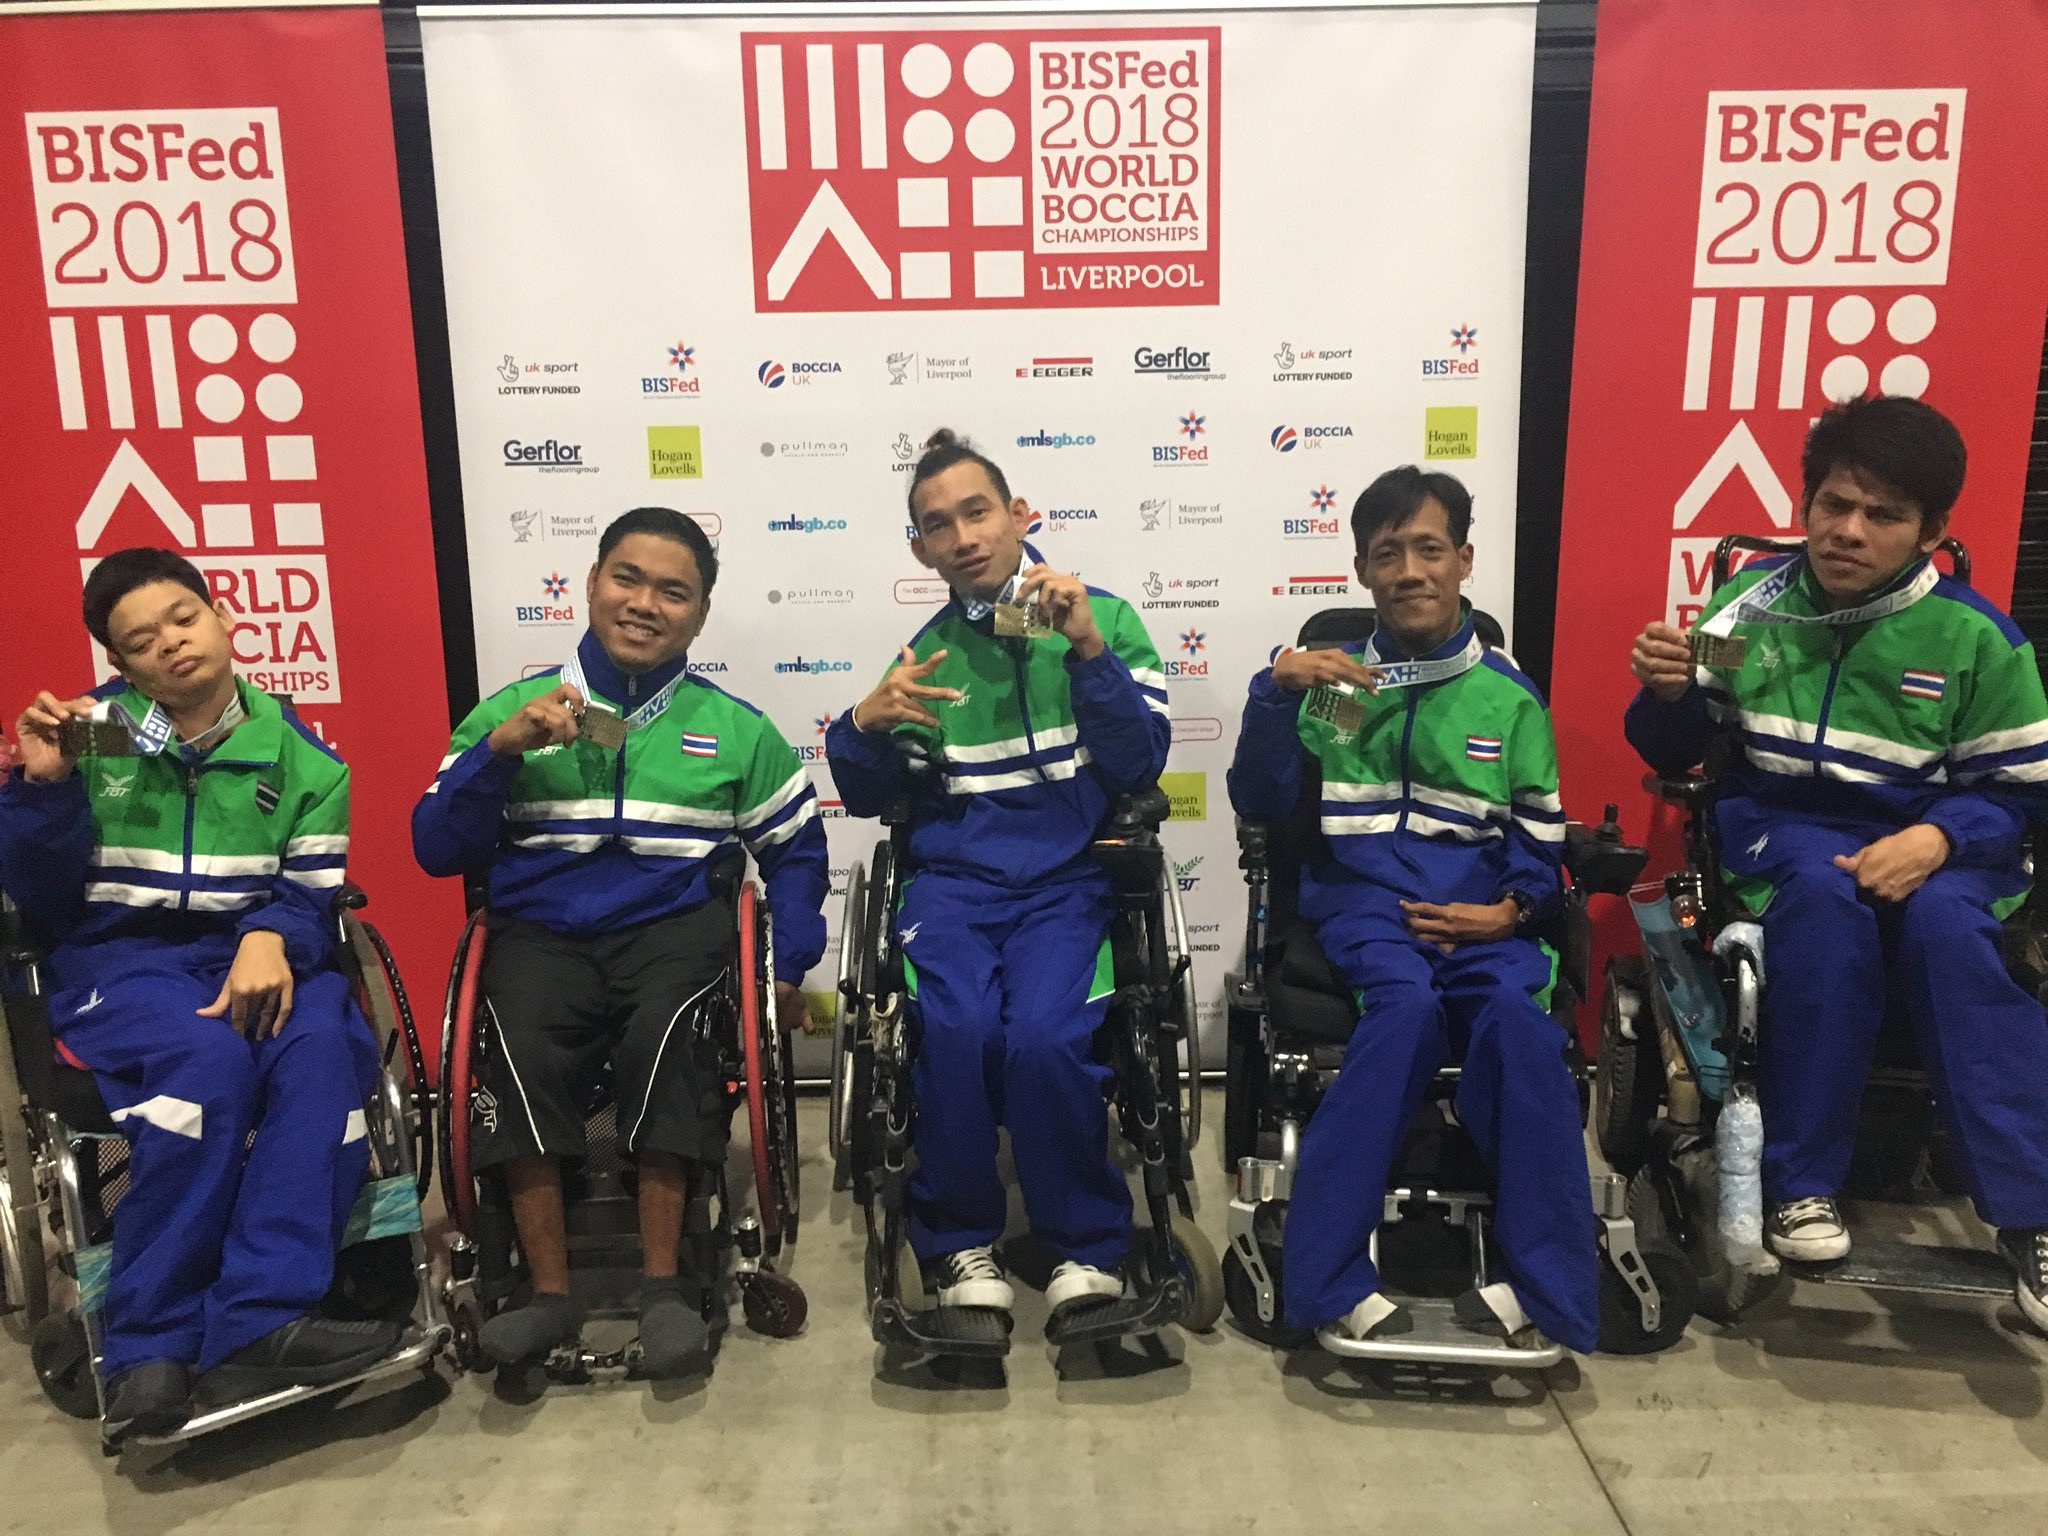 Thailand's BC1/BC2 team won gold and keep their world number one ranking at the 2018 BISFed World Boccia Championships ©2018 World Boccia/Twitter